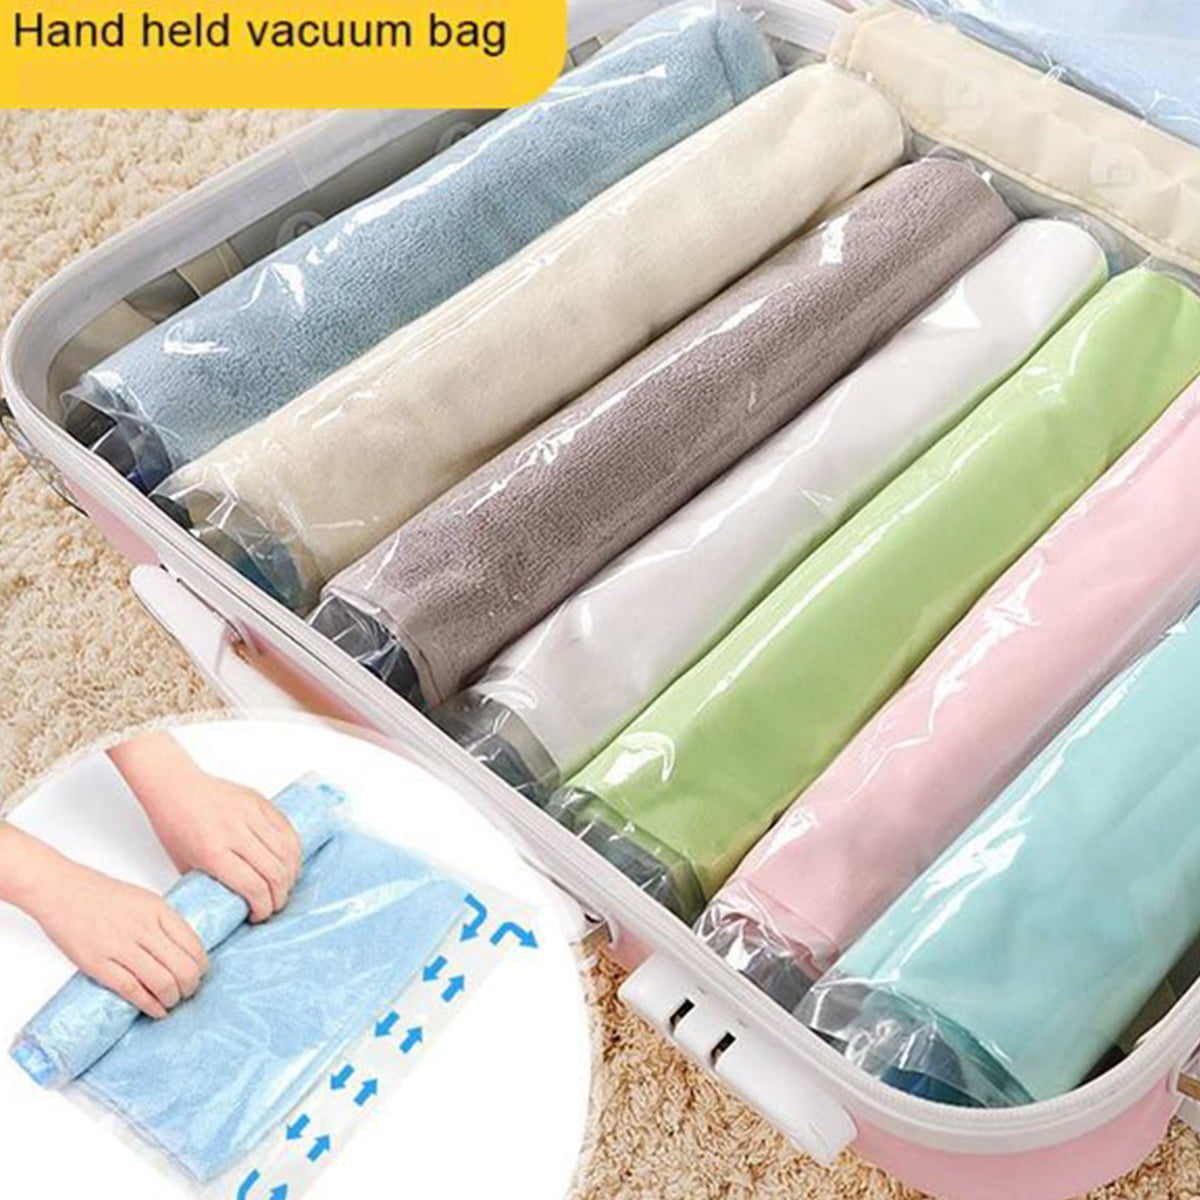 figg Vacuum Compression Storage Bags - XXL (39.37 x 31.49 in)* 6 Pack -  Leakproof and Carbon neutral - Vacuum seal bags for Clothes, Pillows,  Towel